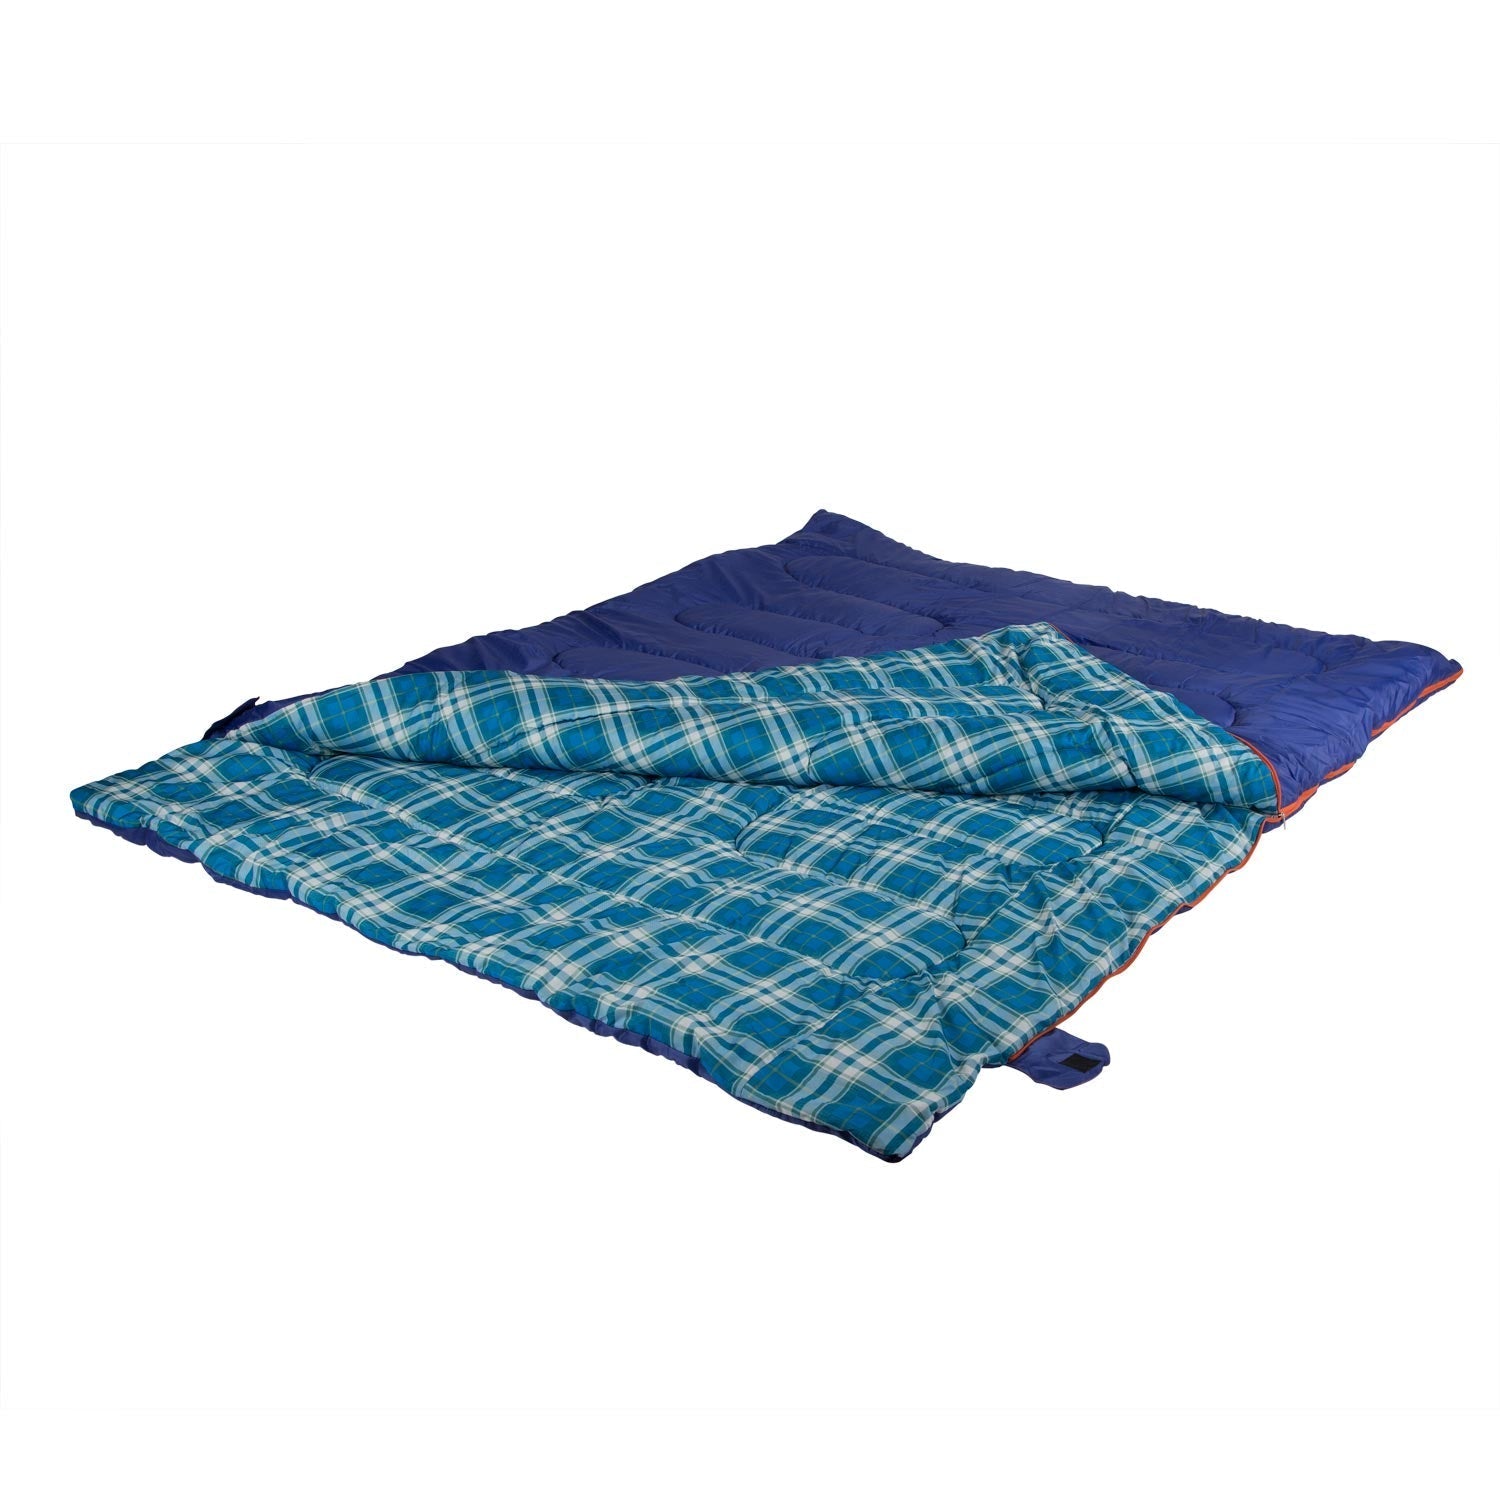 6 LB - 2 Person Sleeping Bag - 87 IN X 66 IN